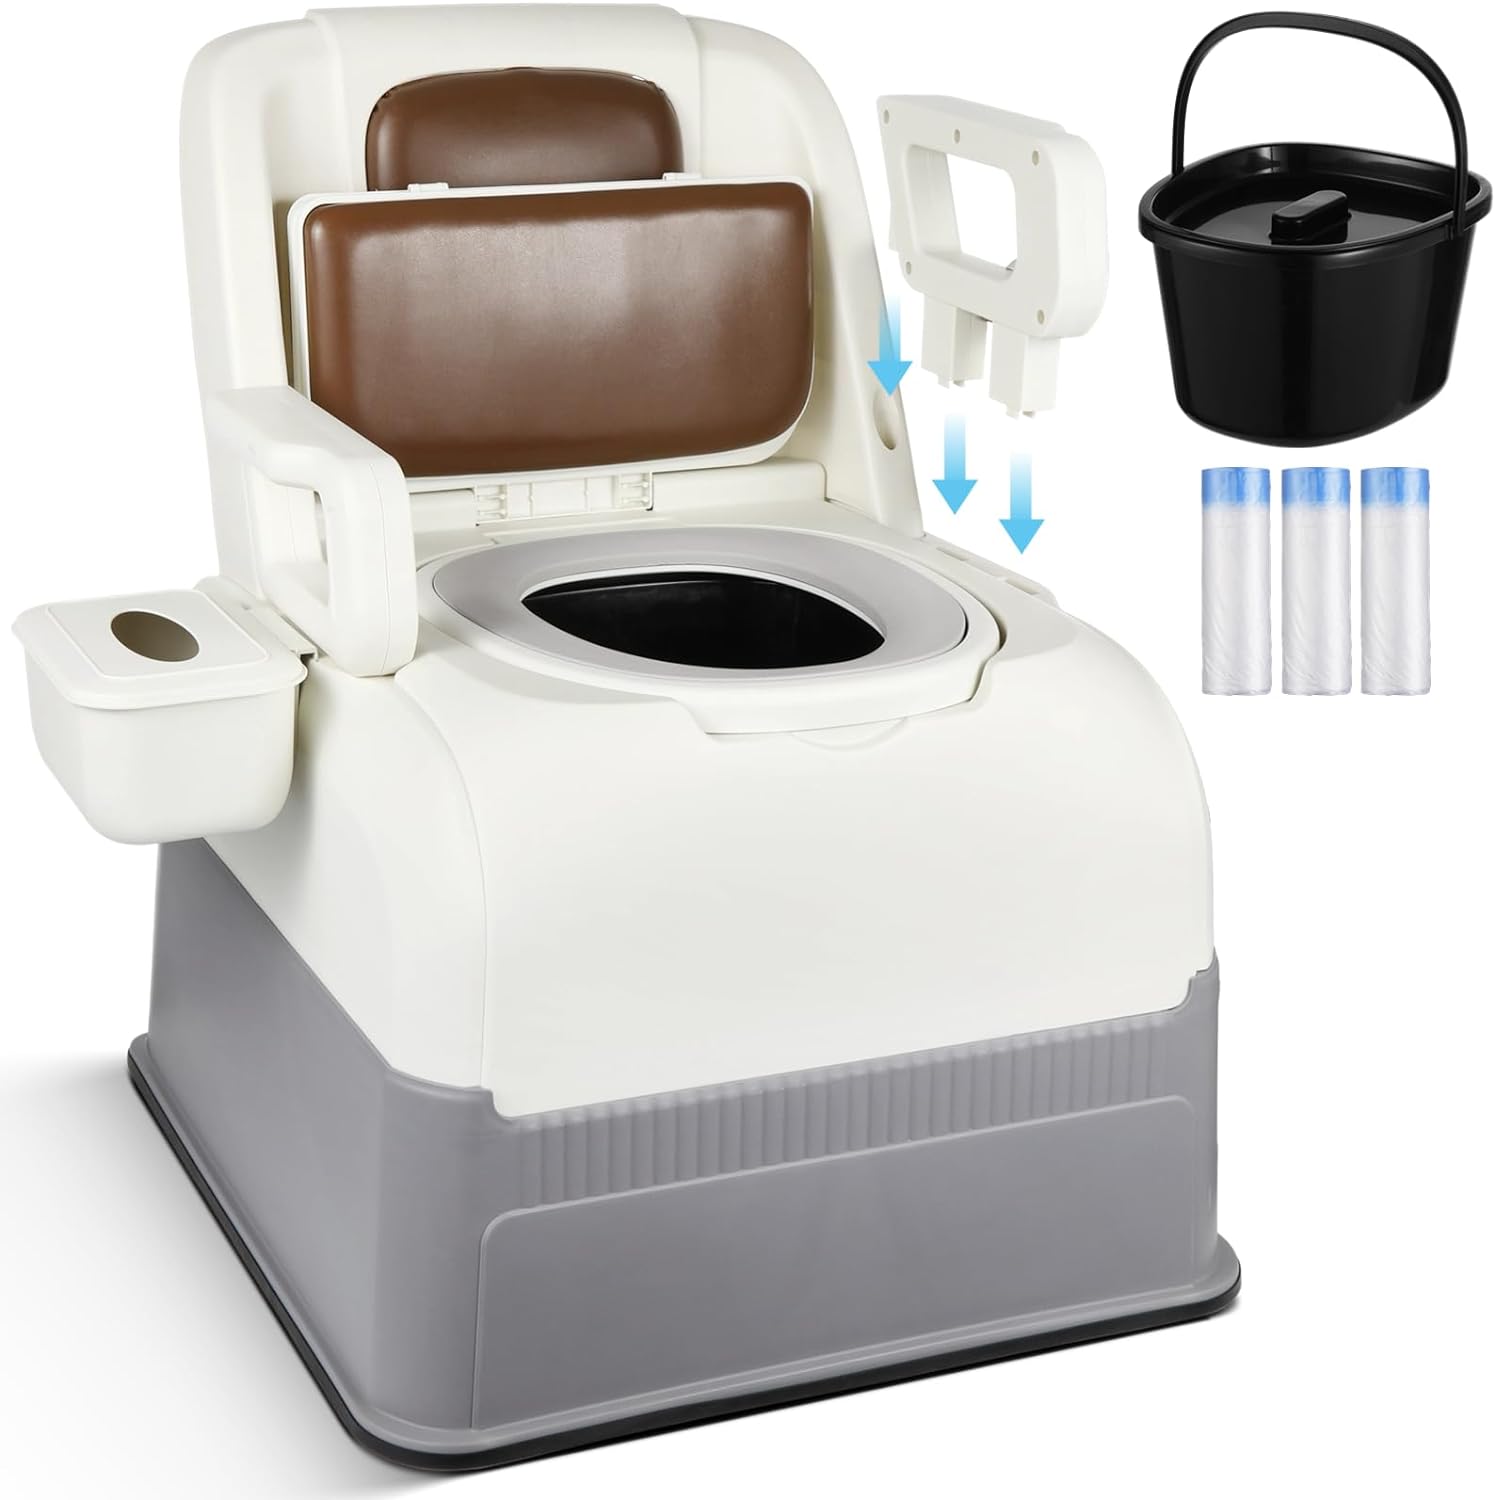 Portable Bedside Commode Chair I Odorless Potty Chair for Elderly, Disabled, Pregnant Women, and Adults on the Go I Model MEW22310